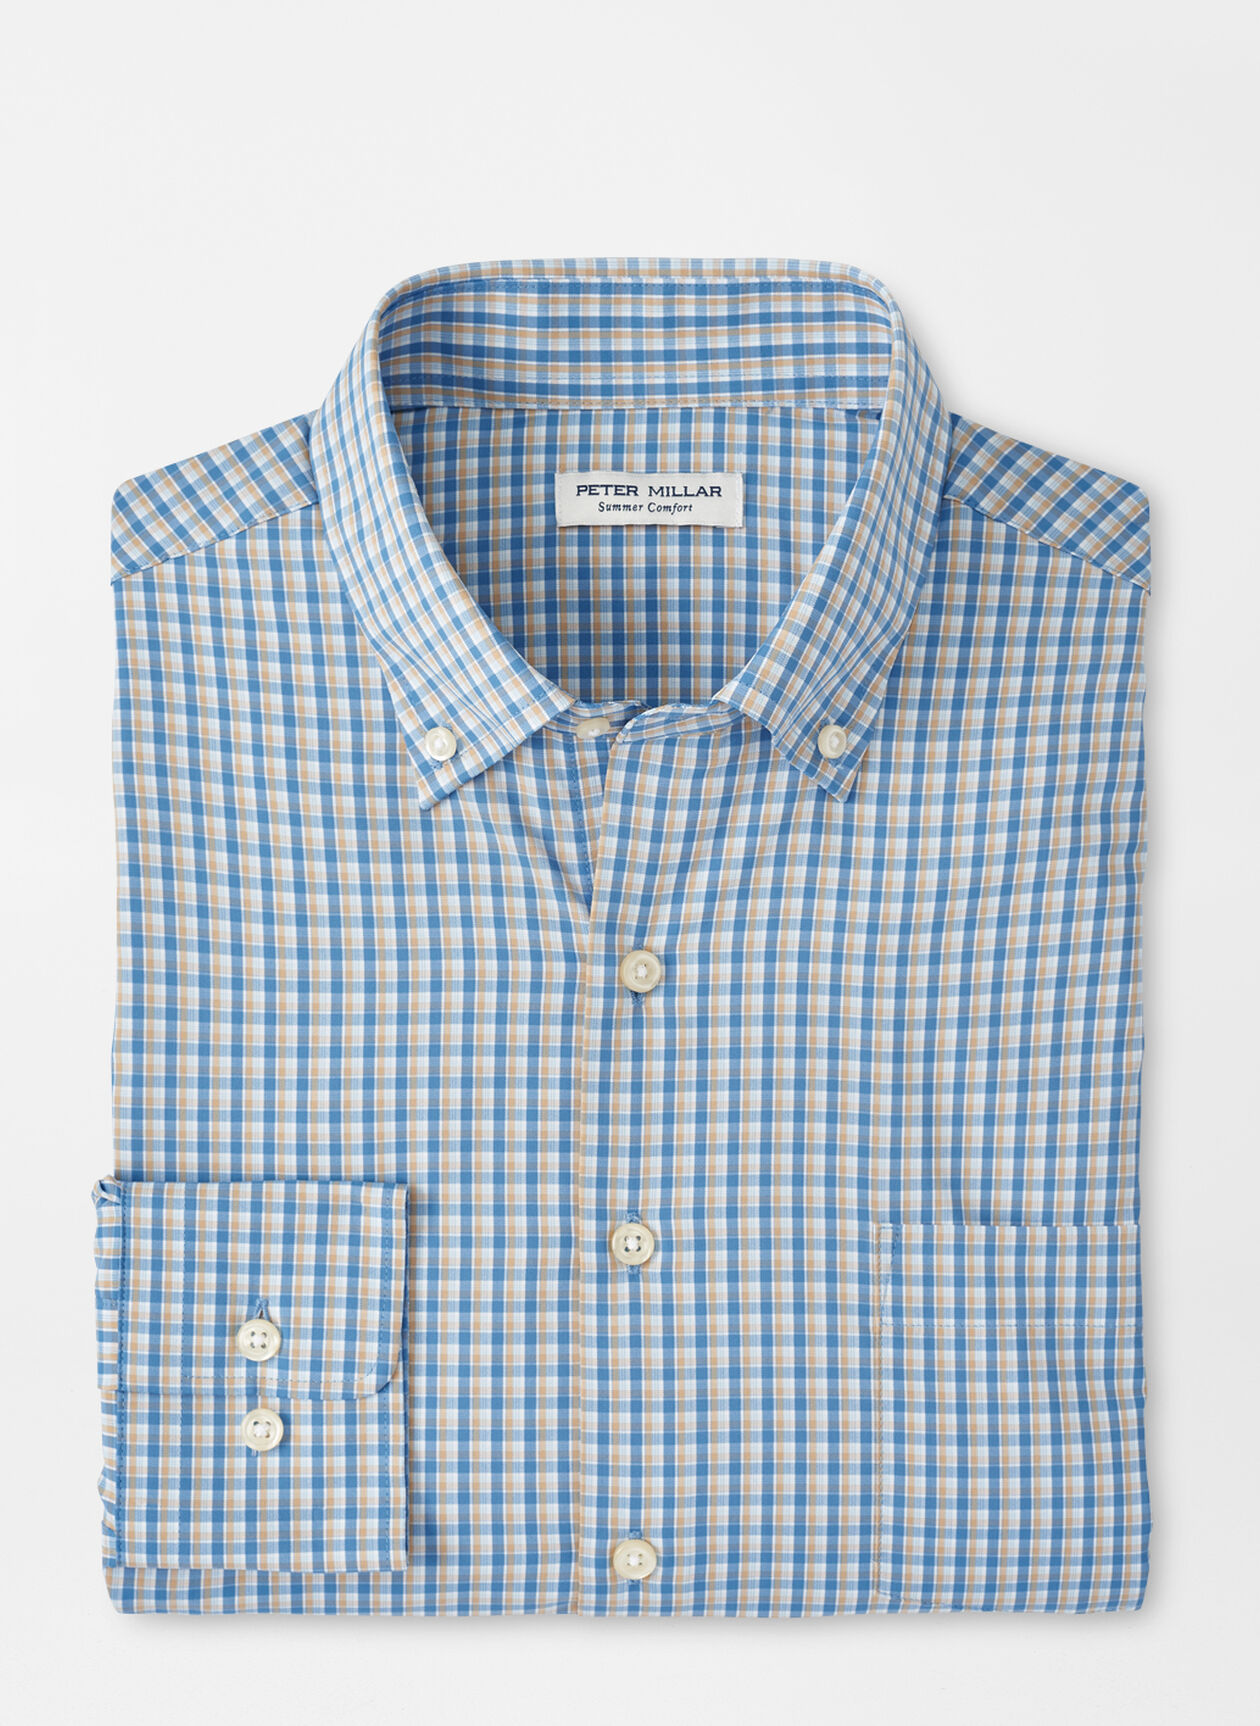 Ashbury Performance Twill Sport Shirt in Twilight Blue by Peter